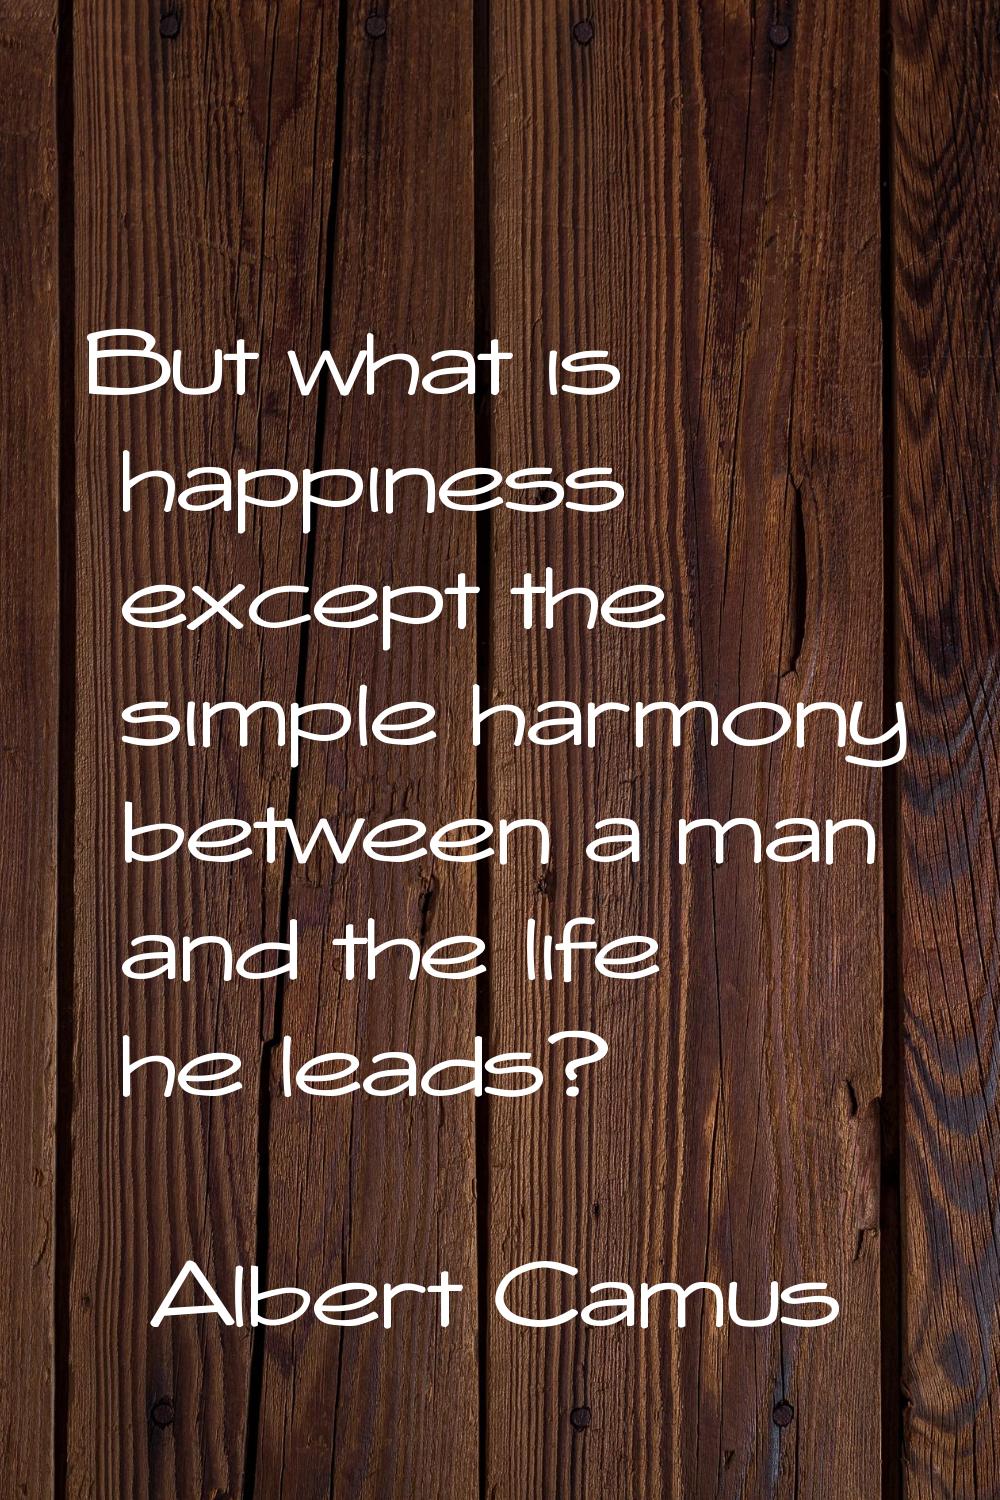 But what is happiness except the simple harmony between a man and the life he leads?